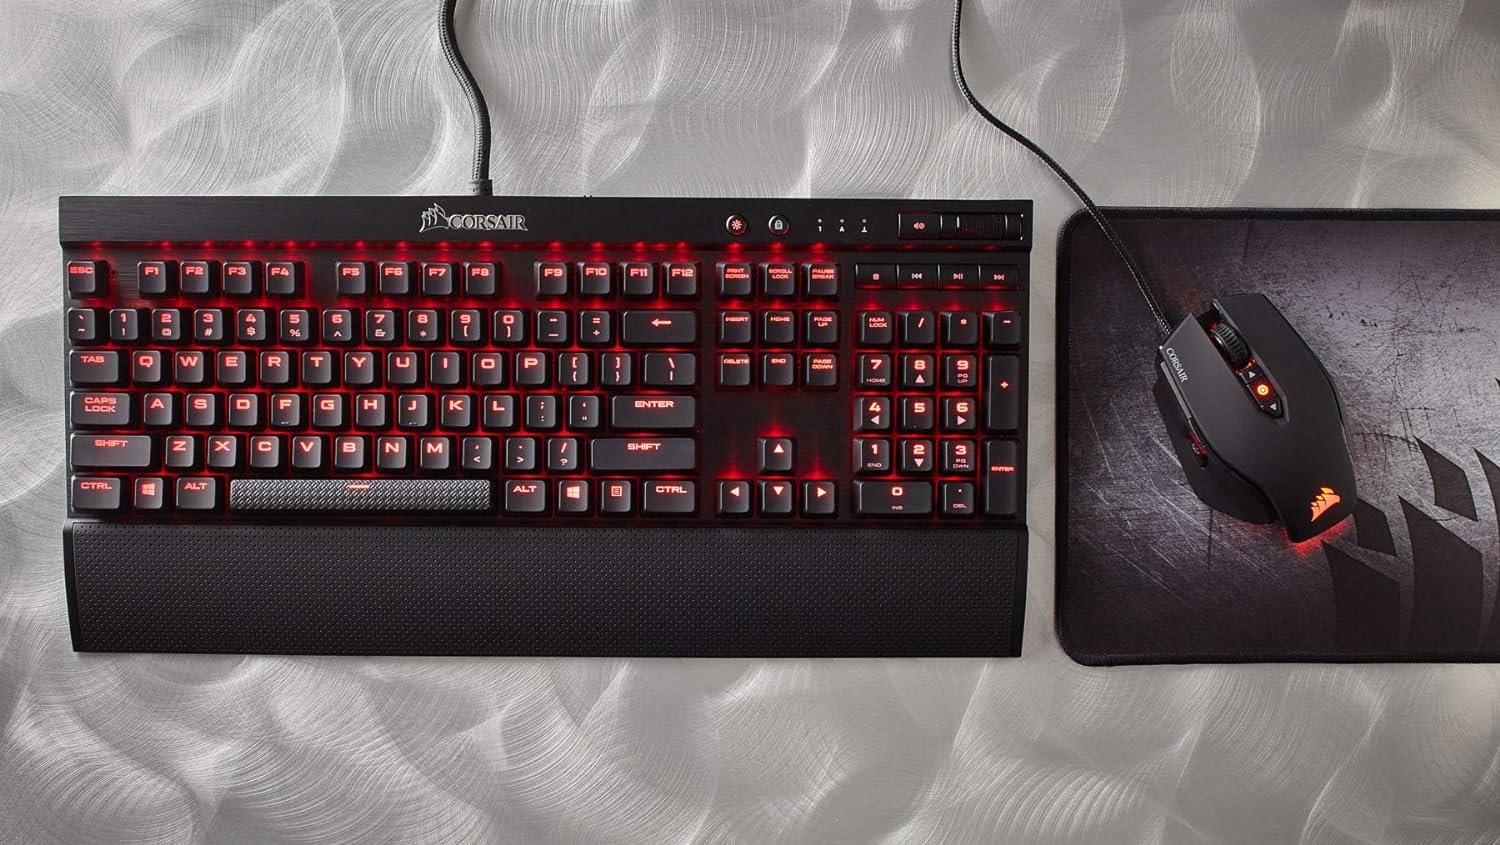 Corsair Mechanical Gaming Keyboard K70 Lux Cherry MX Blue - Durable construction for long-lasting use. 0843591074124